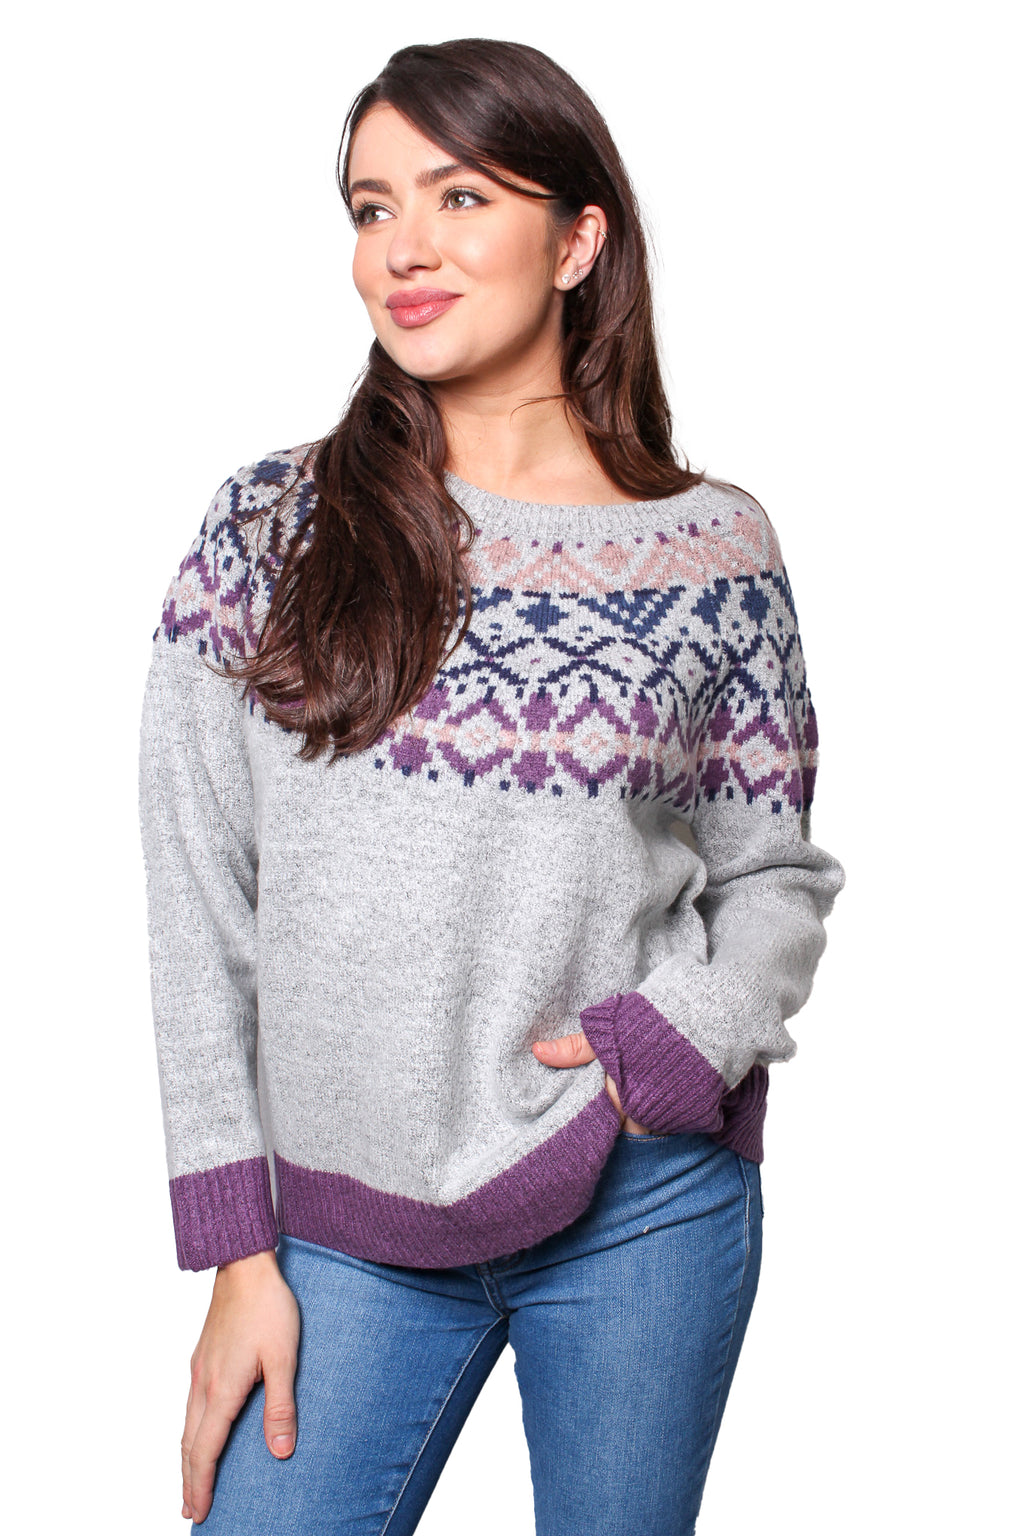 Women's Long Sleeves Round Neck Knitted Jacquard Sweater